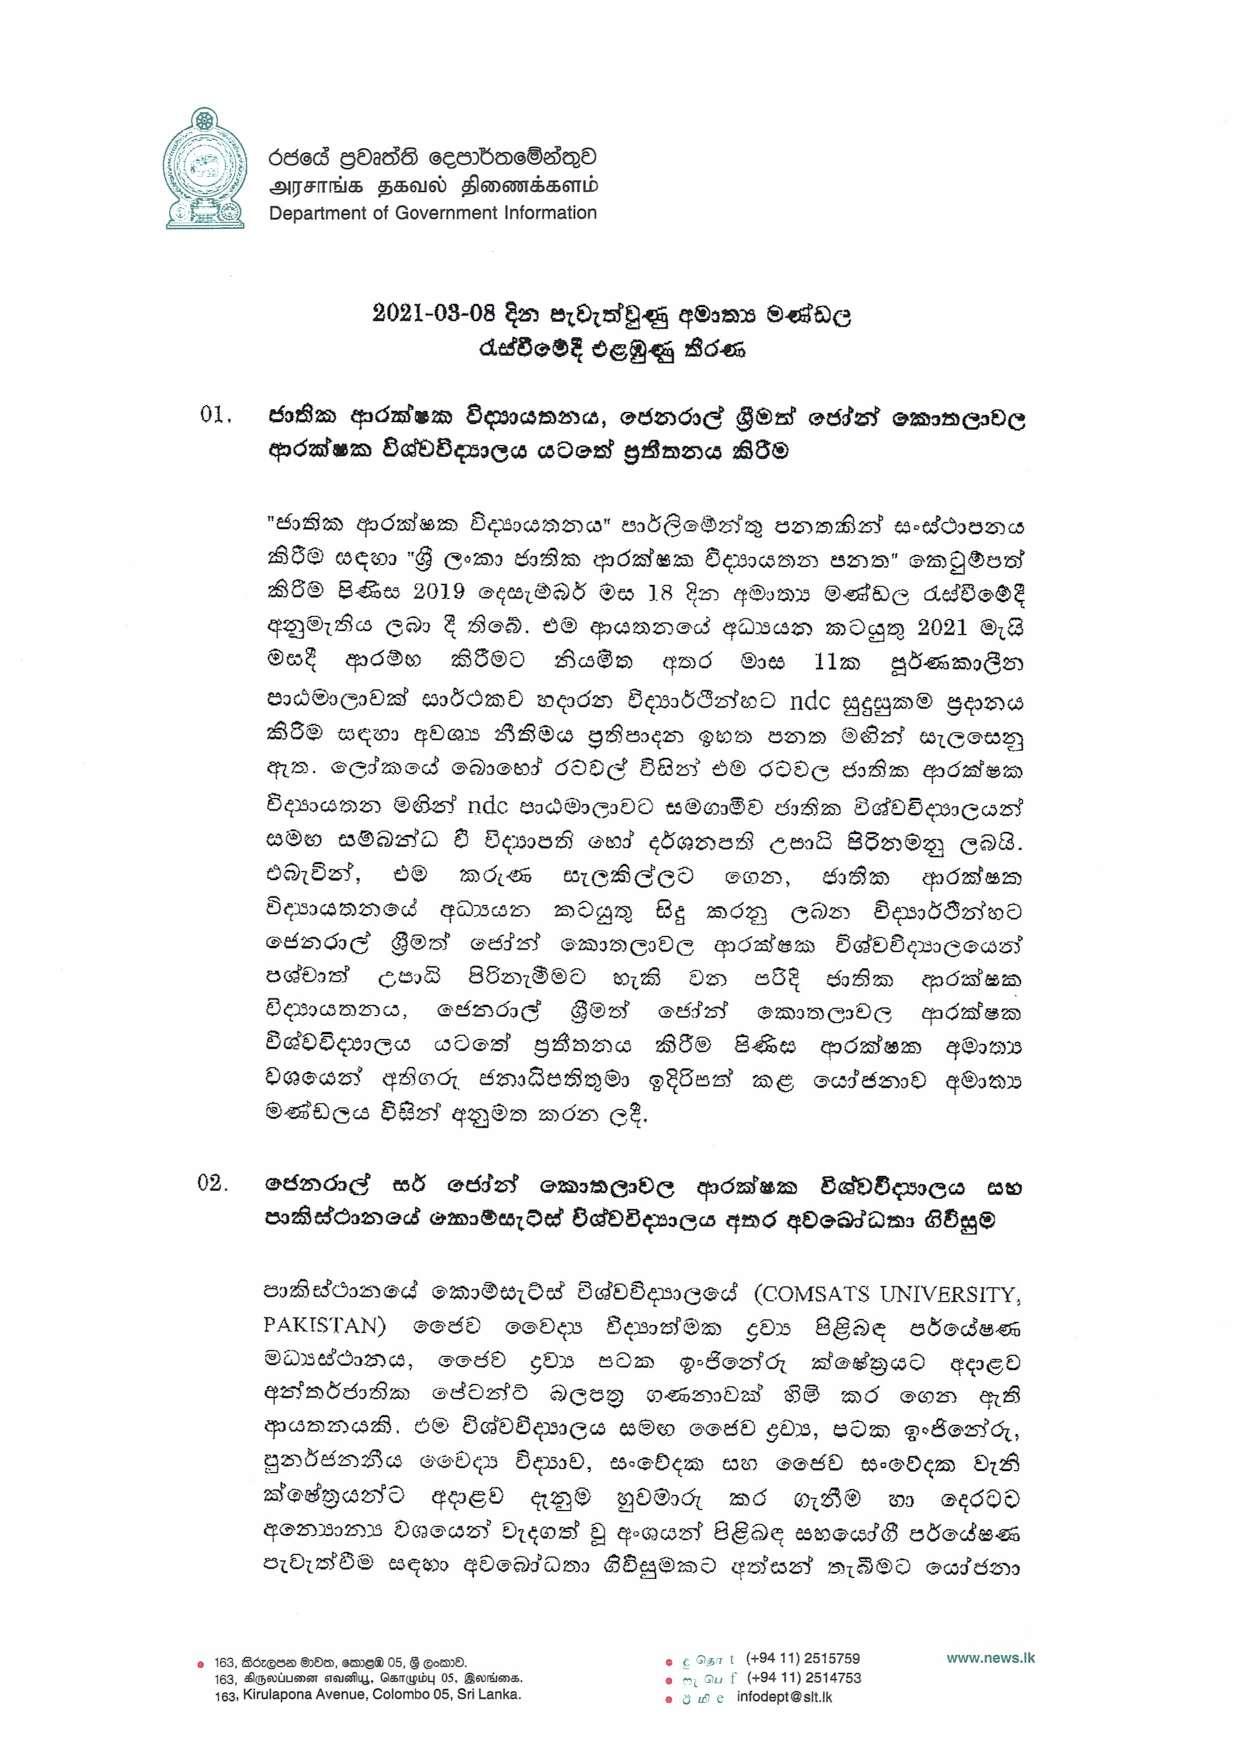 Cabinet Decision on 08.03.2021 compressed page 001